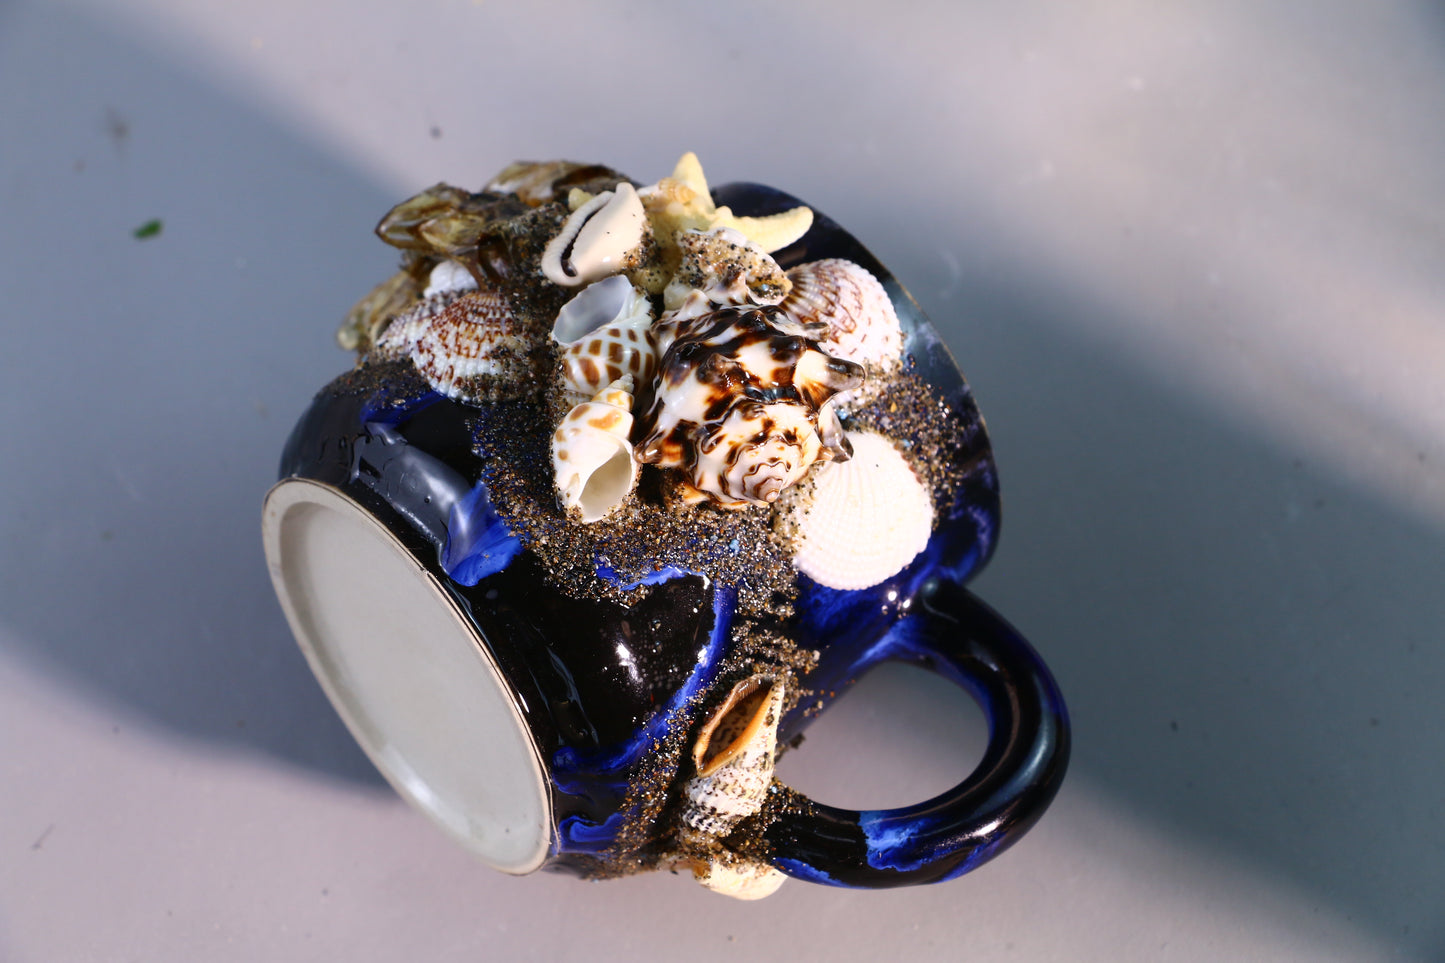 Sea Shell Ceramic Coffee Mug, Ocean Series Personalized Handmade Pottery Cup for Gifts